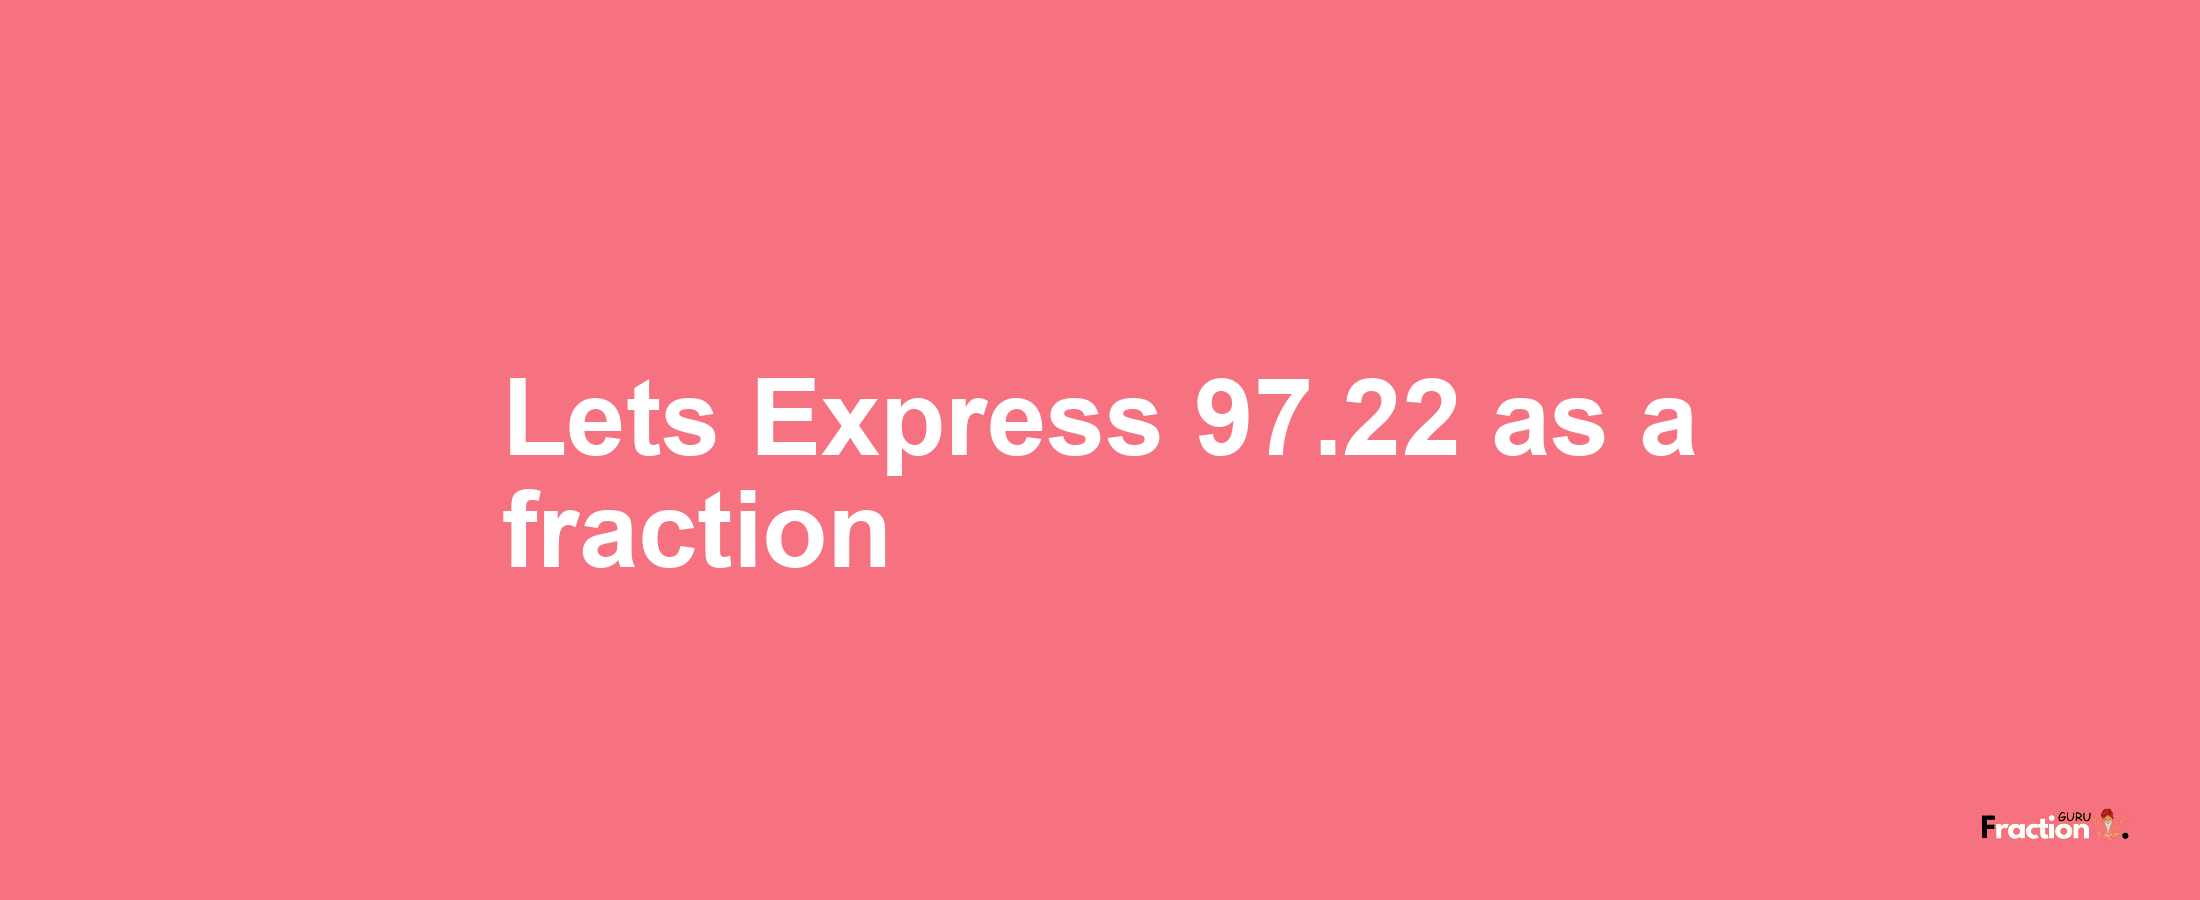 Lets Express 97.22 as afraction